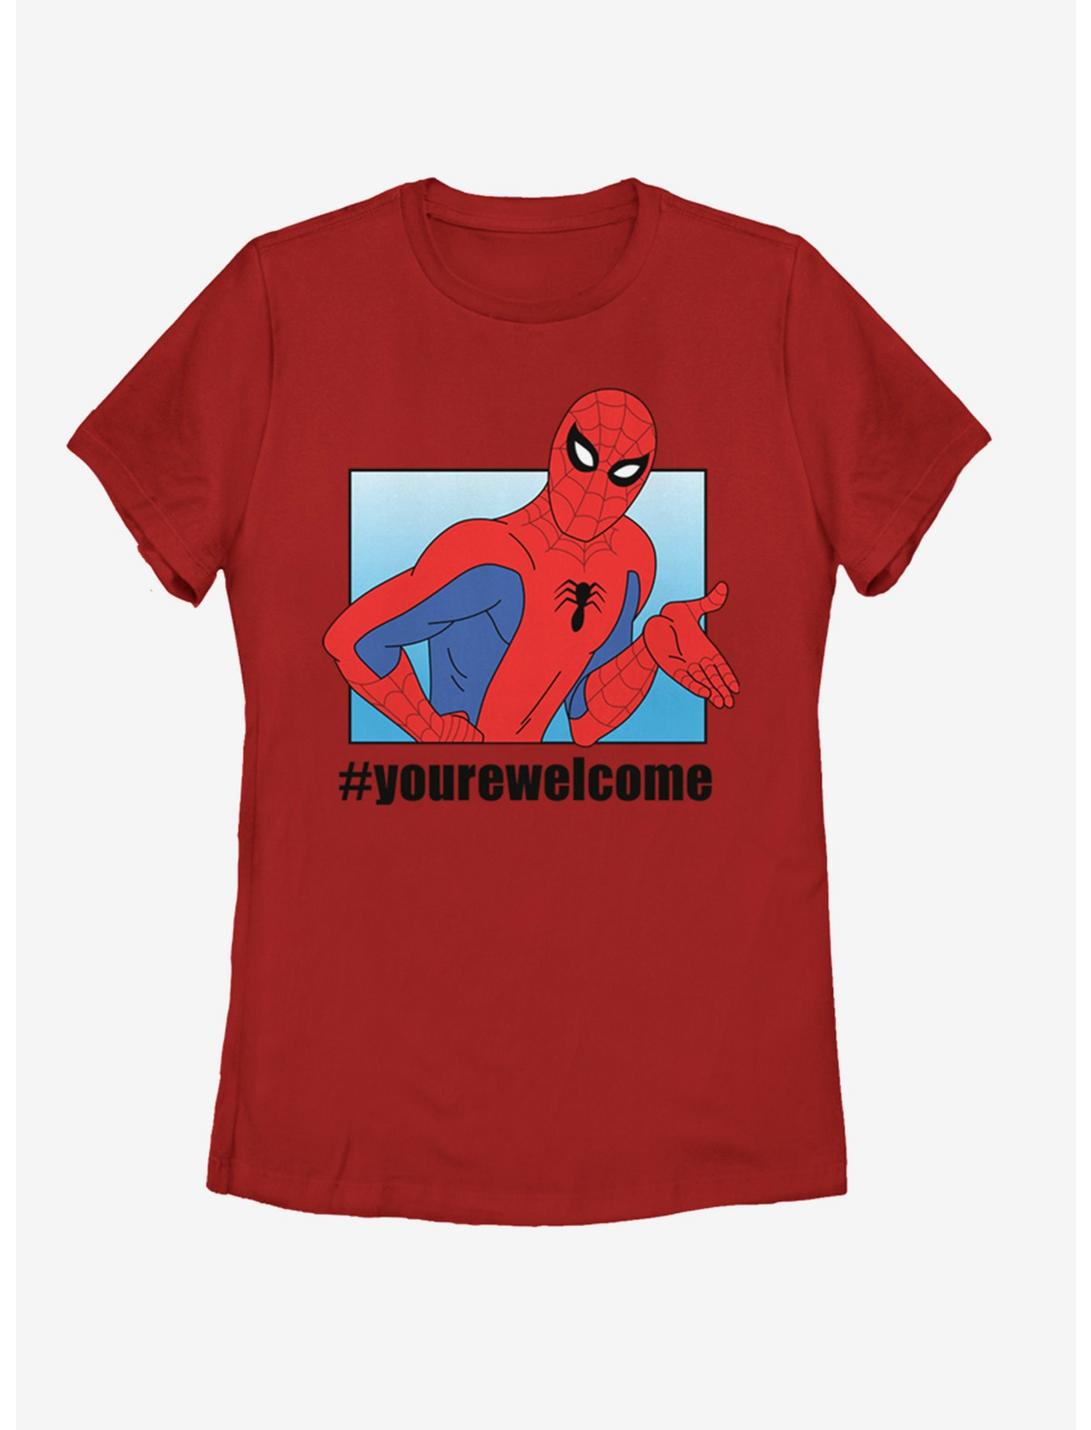 Marvel Spider-Man #Yourewelcome Womens T-Shirt, RED, hi-res